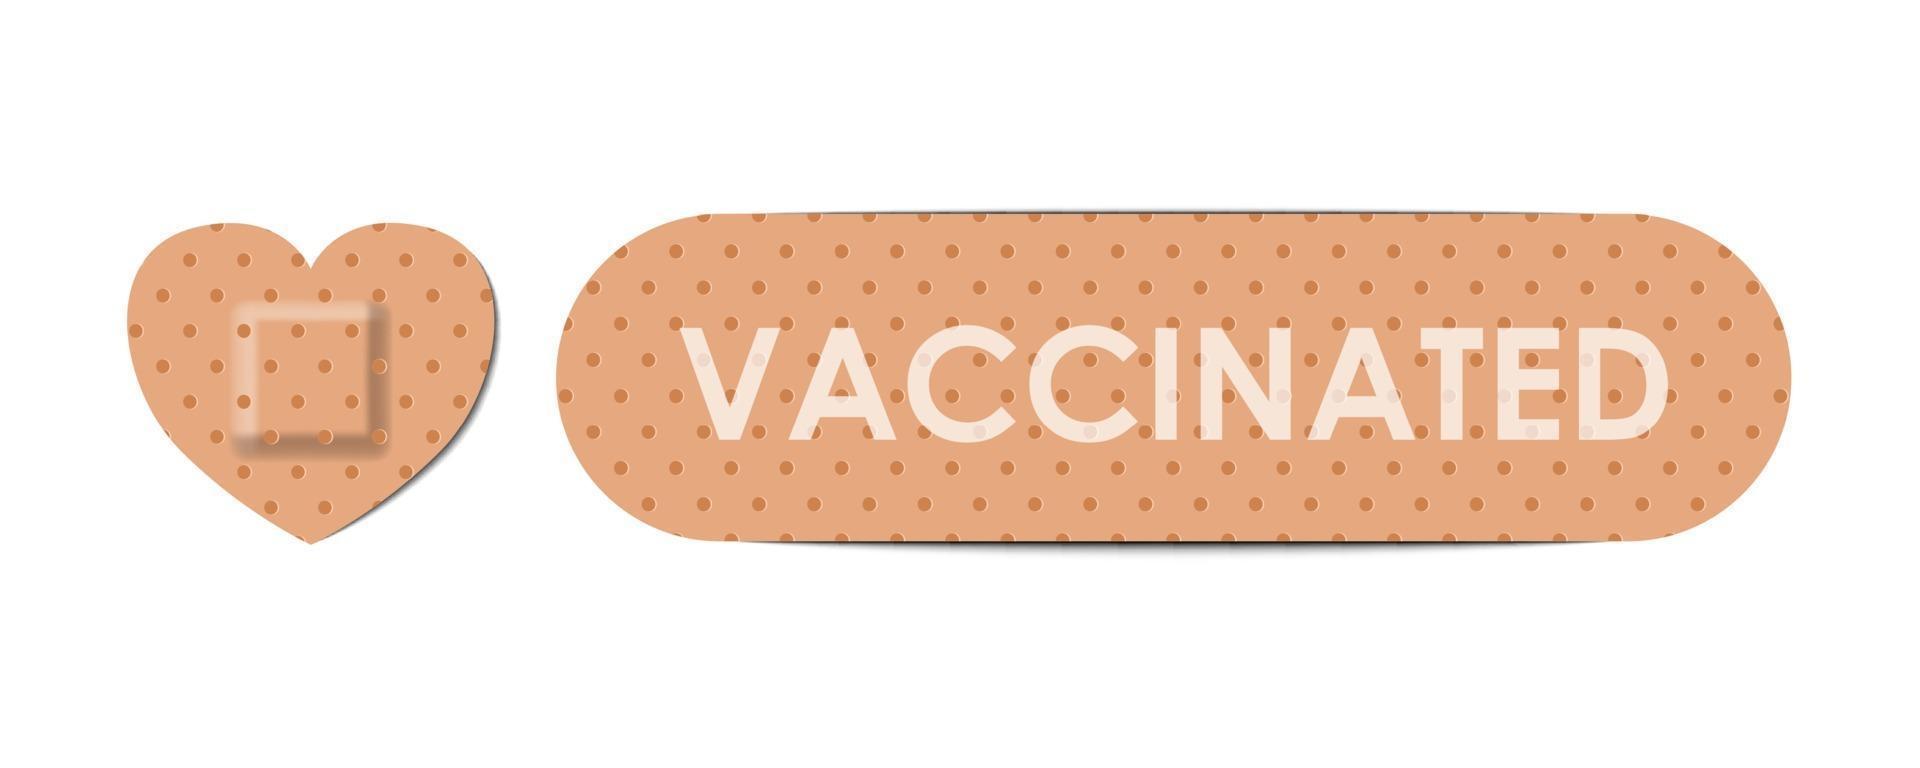 Vaccinated bandages, realistic aids bandages vector